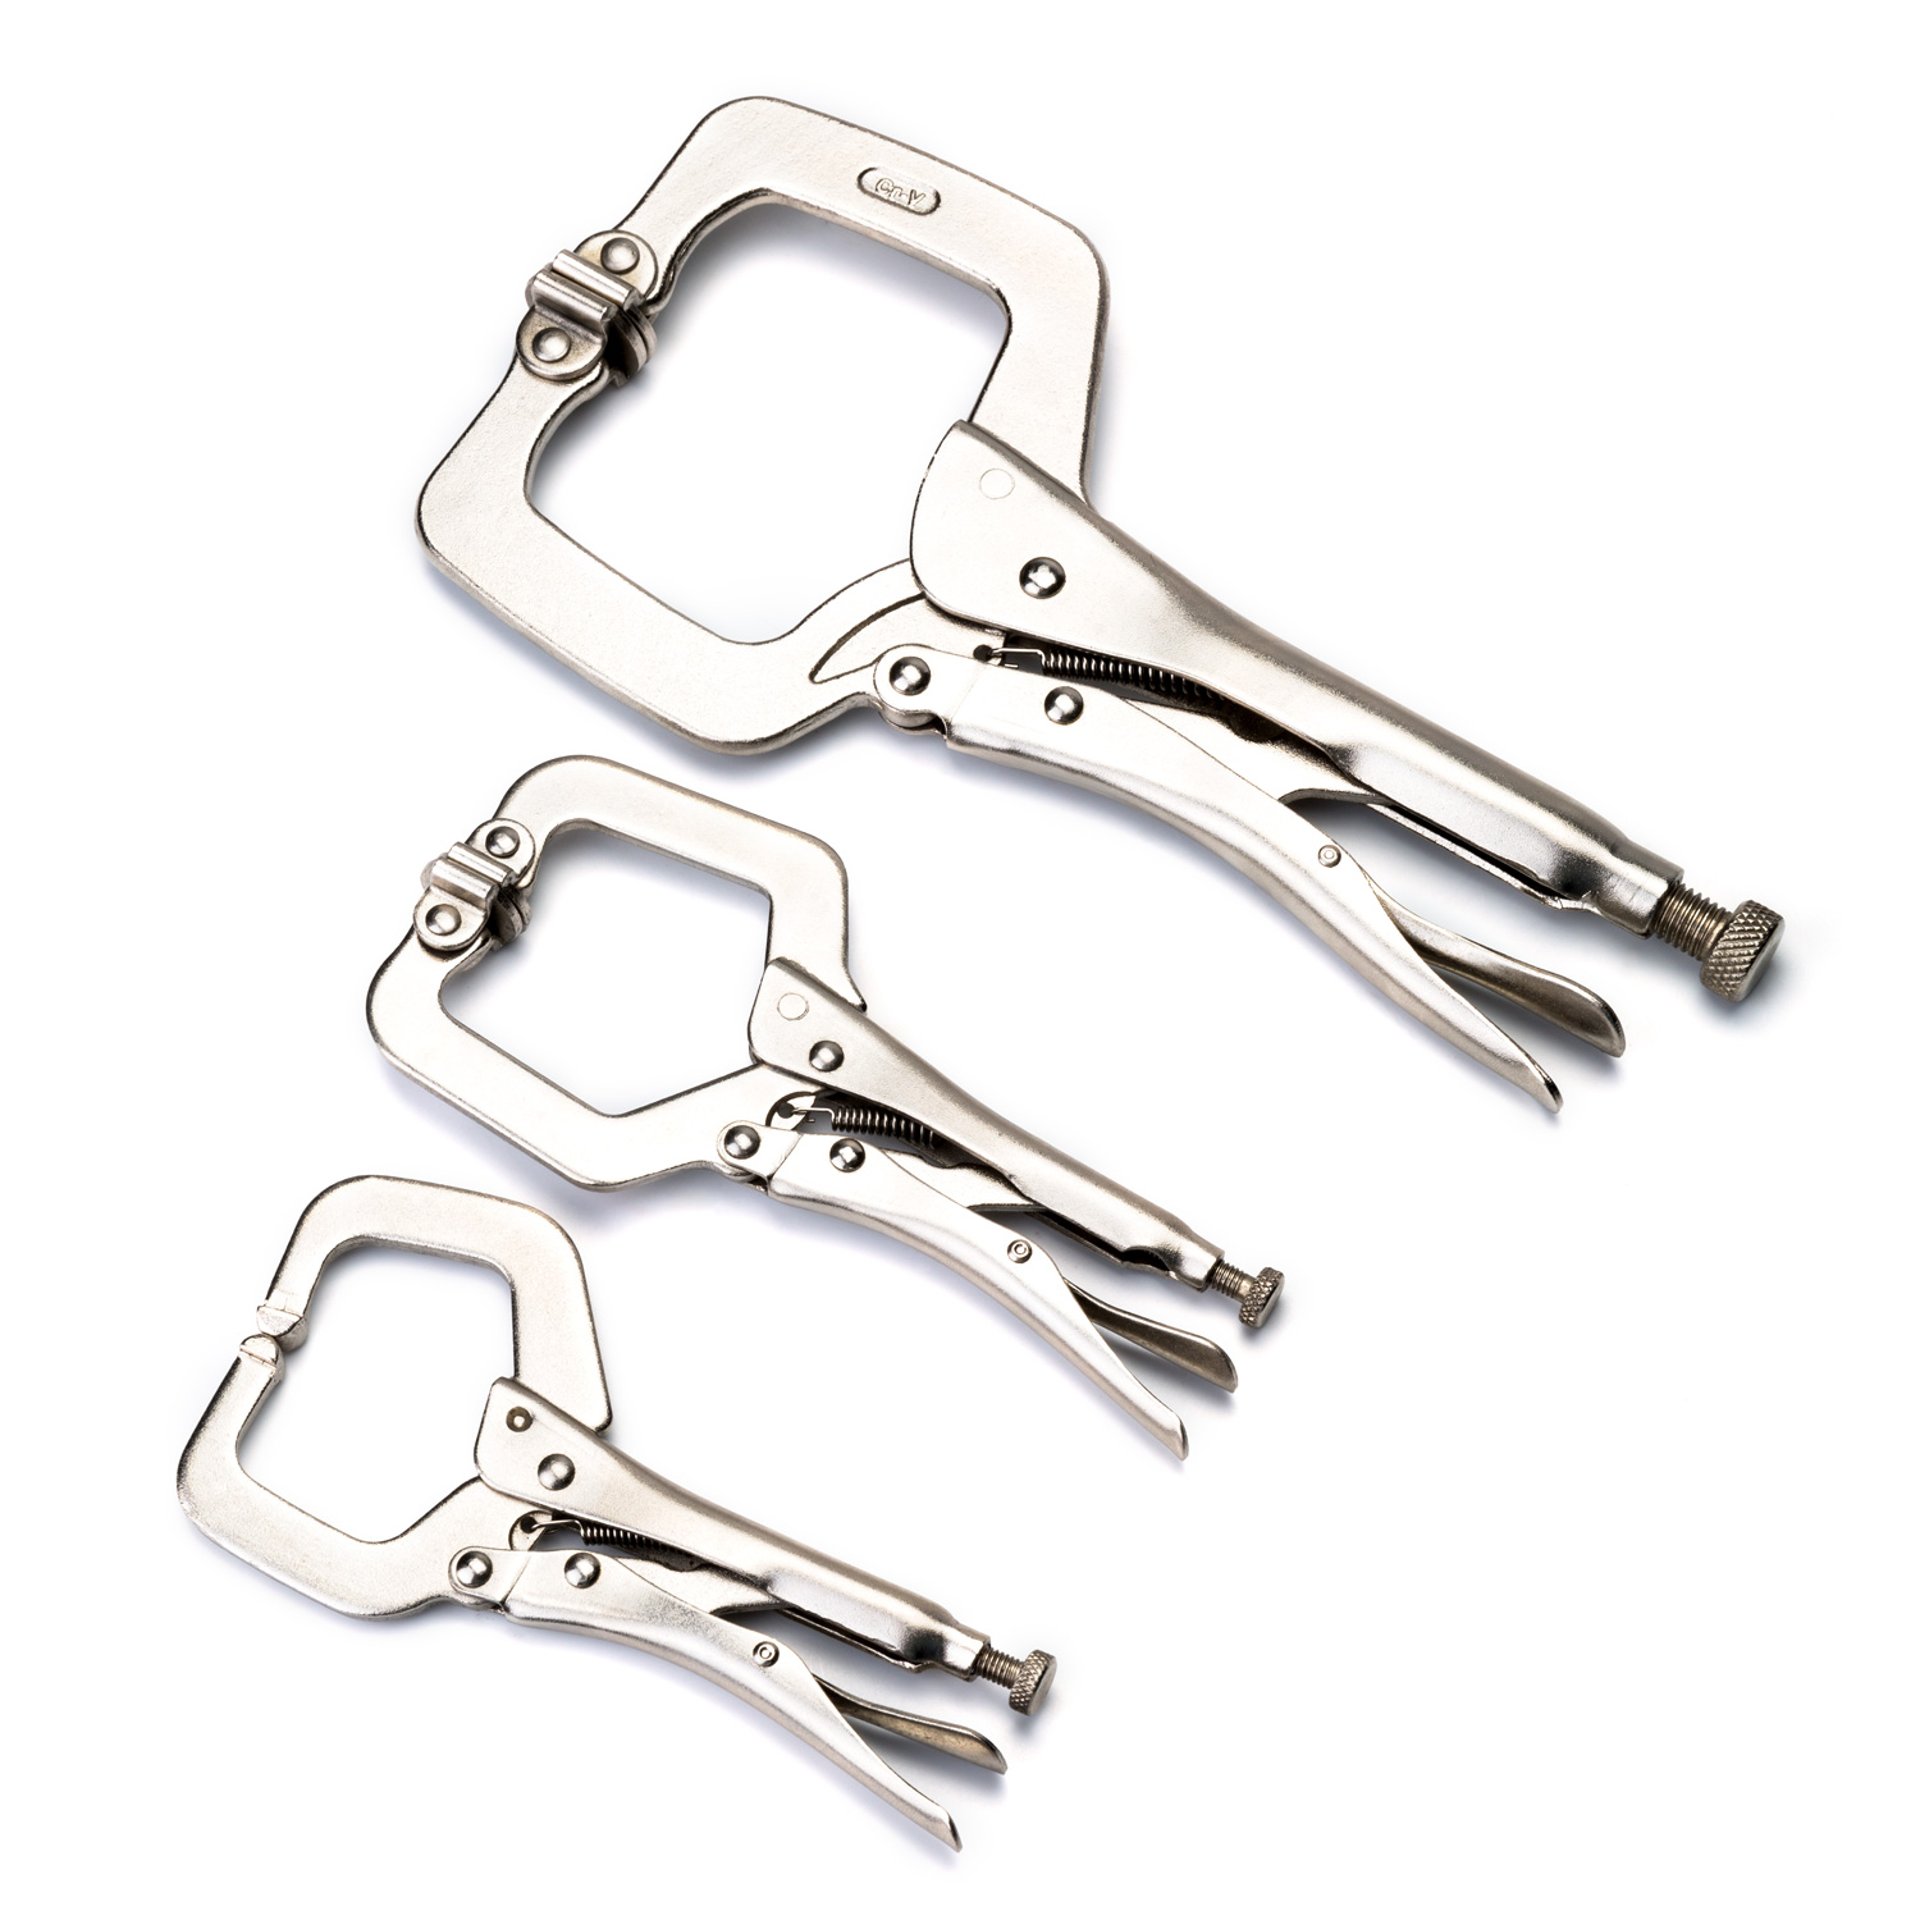 MAXPOWER 3-Piece Locking C-clamp Set - 11 inch and 6 inch